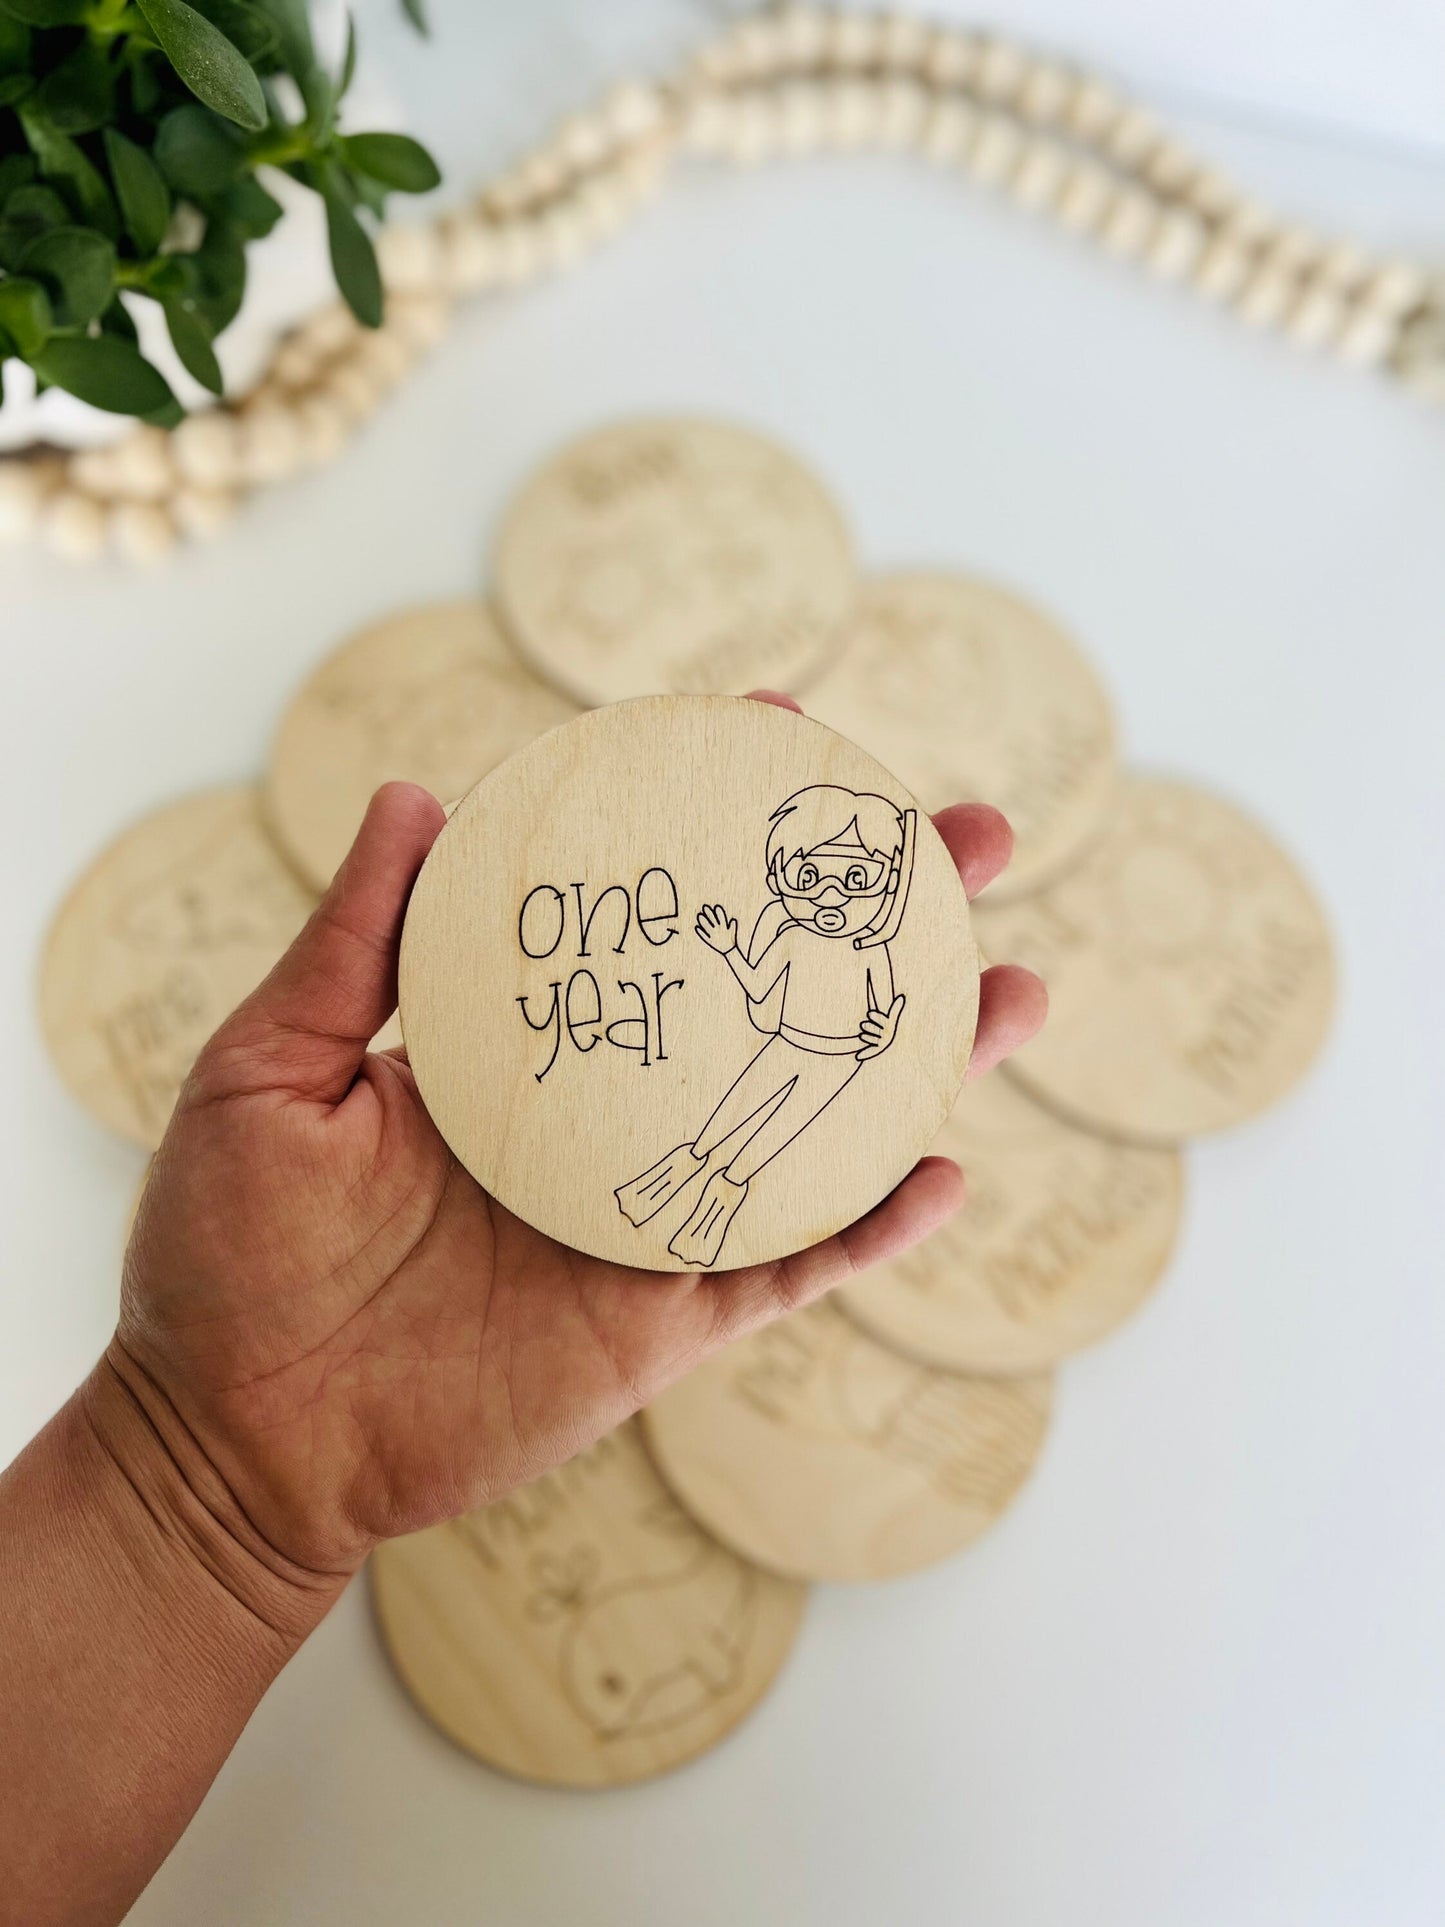 Wooden Monthly Milestone Markers for Baby Photos, Ocean Themed Milestone Disc, Baby Gift